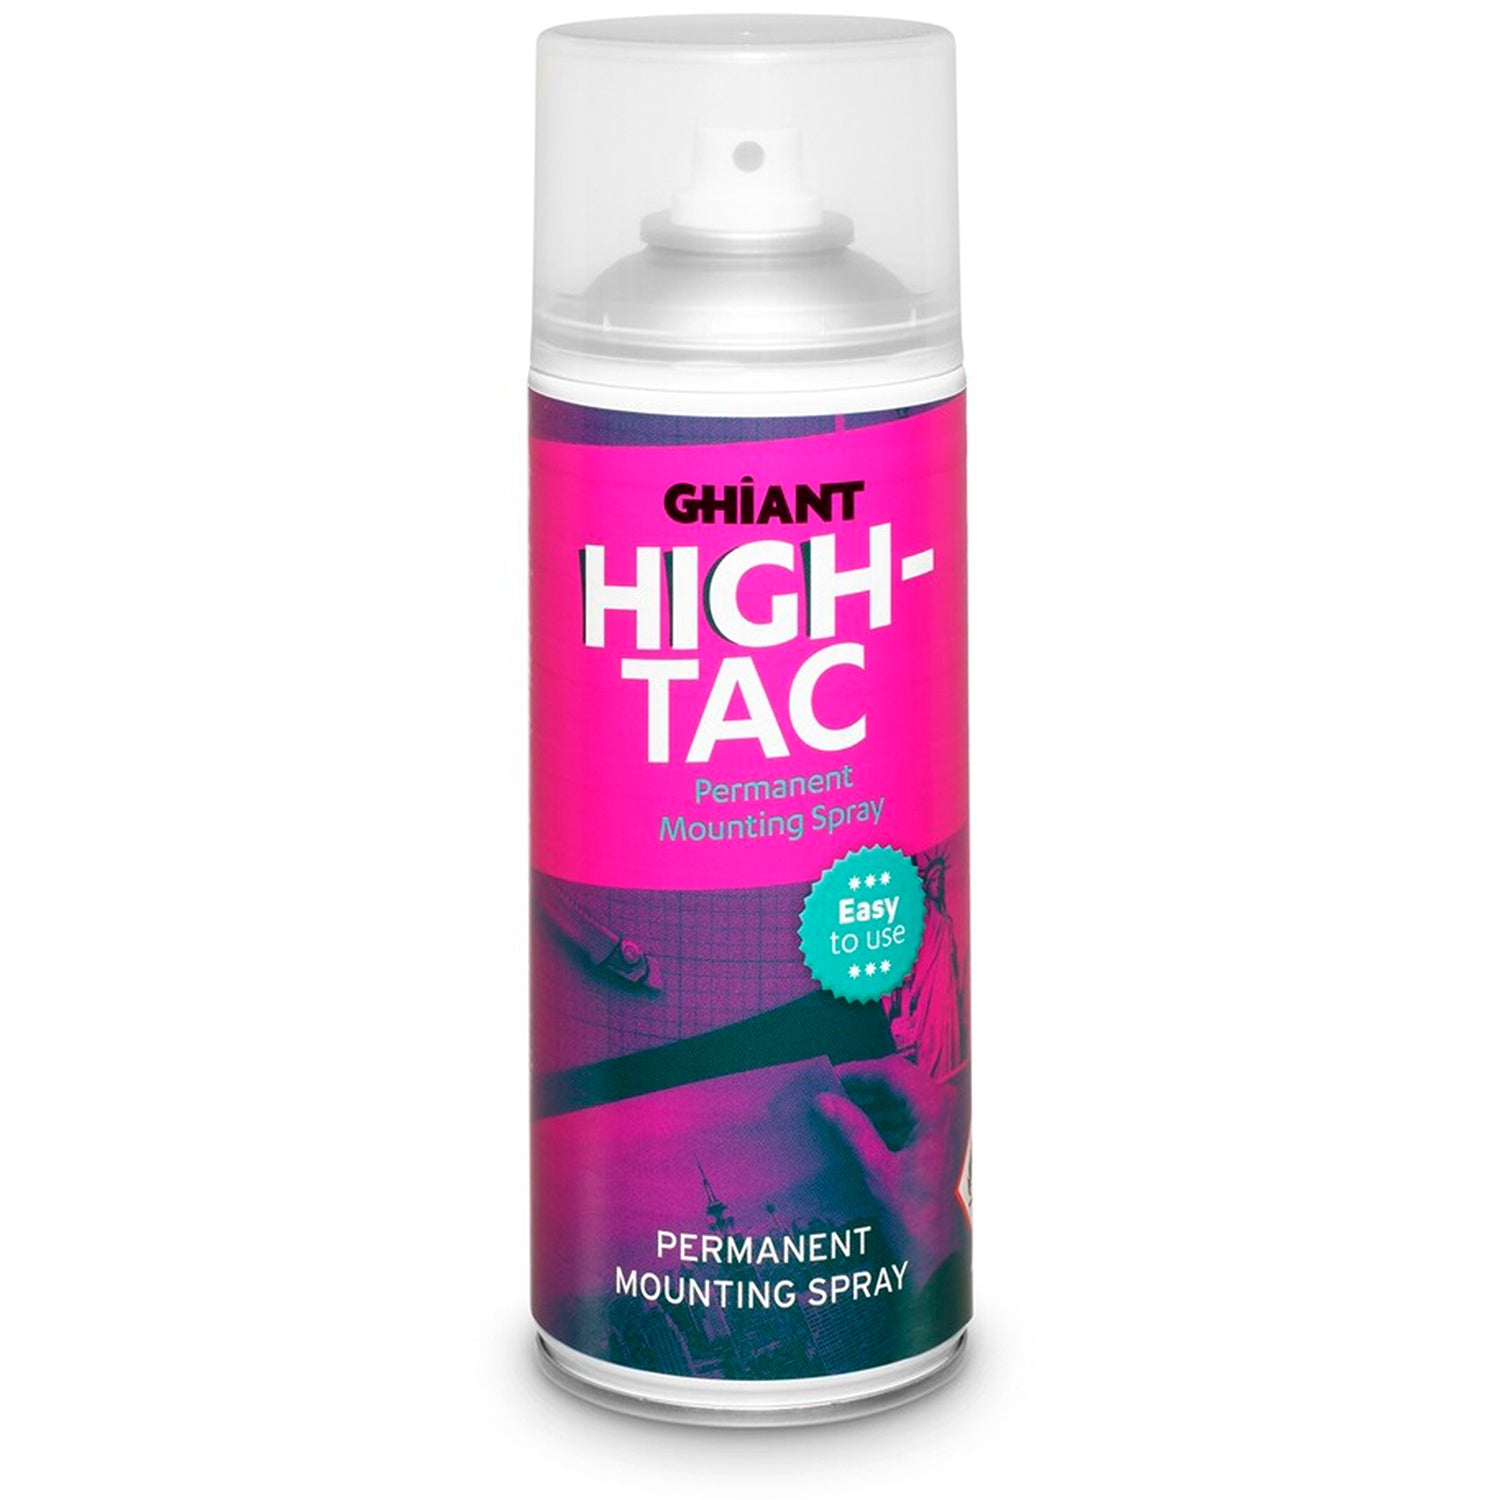 Ghiant HIGH-TAC 400 ml Permanent Mounting Spray Glue for Inkjet Papers